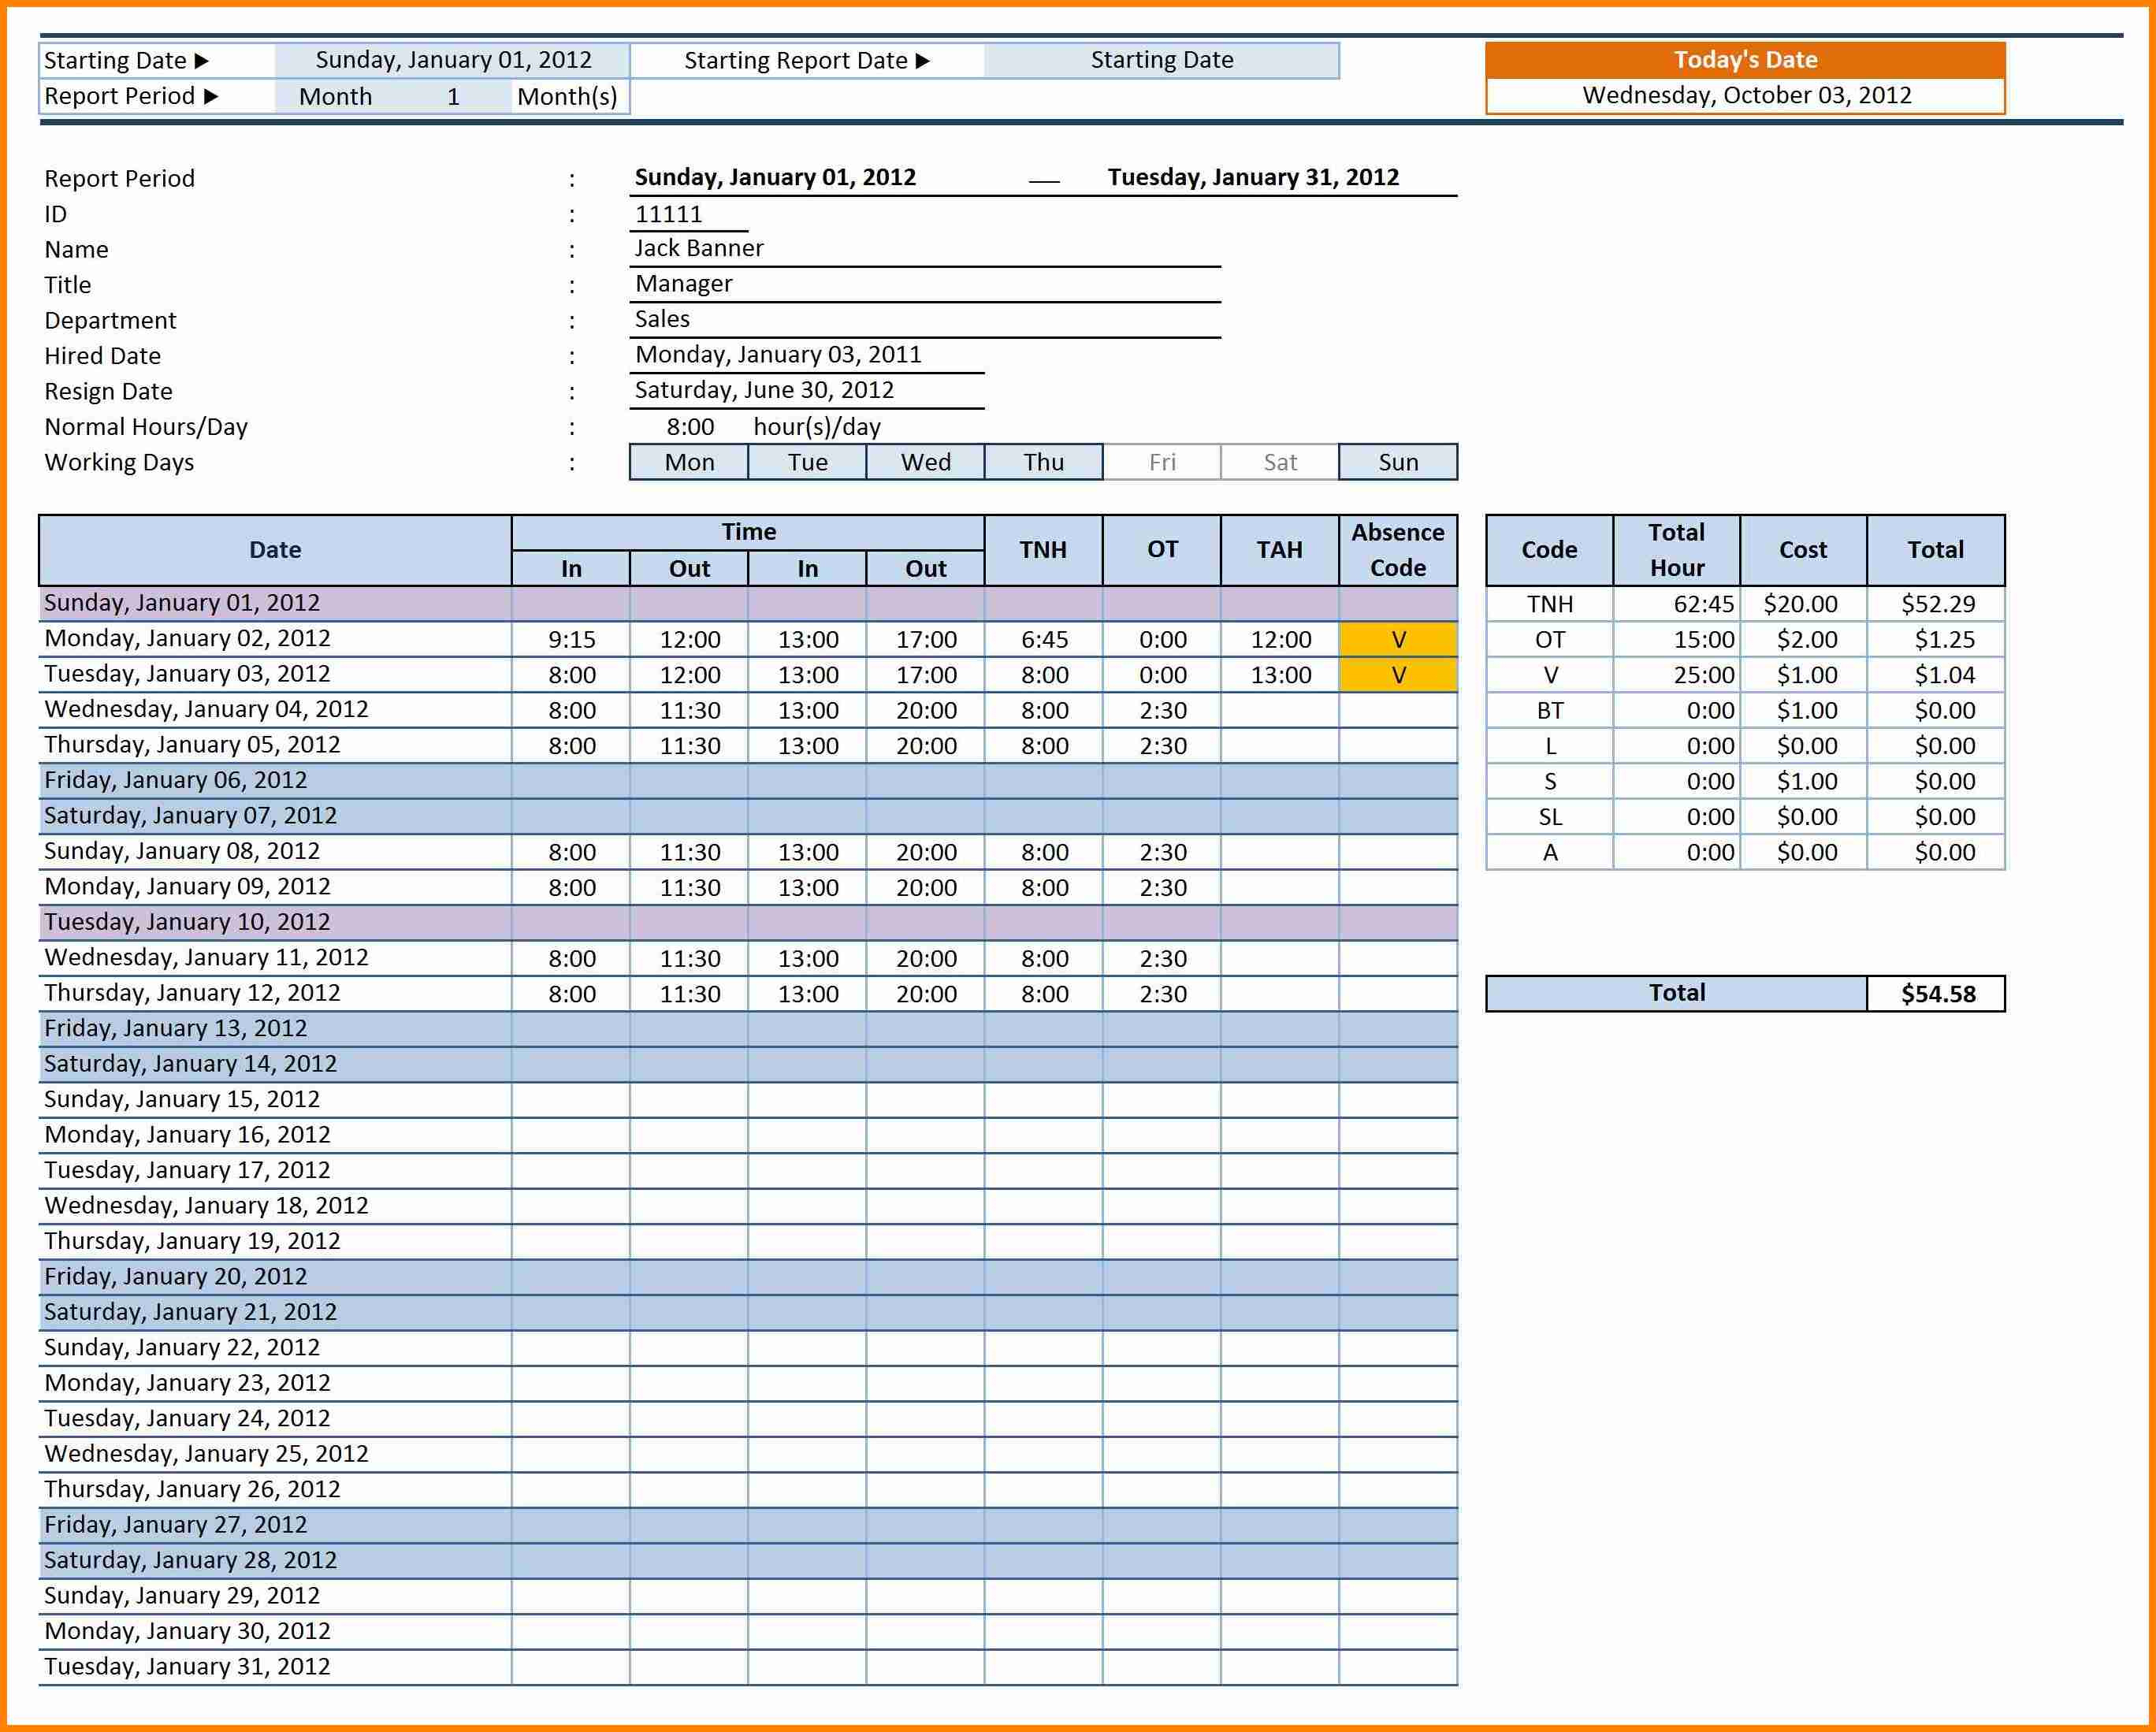 employee-overtime-tracking-spreadsheet-db-excel